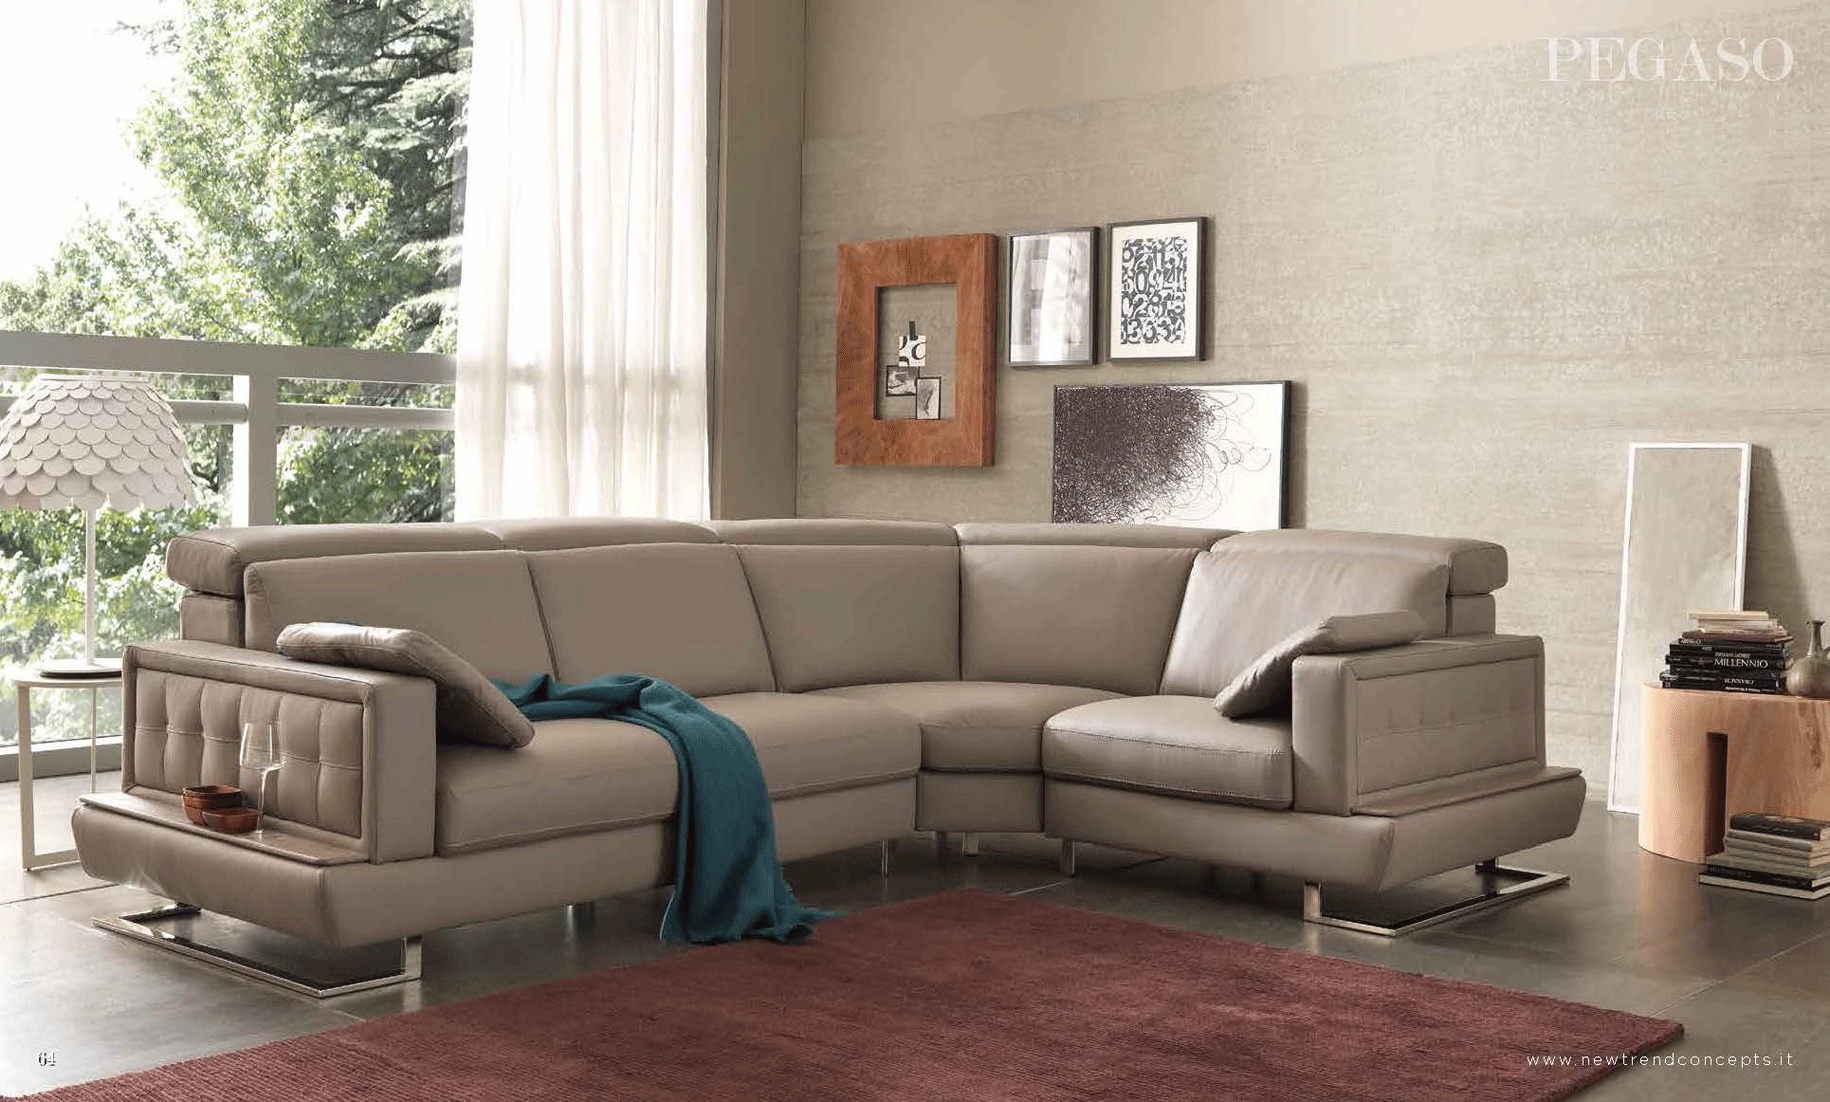 Living Room Furniture Sectionals Pegaso